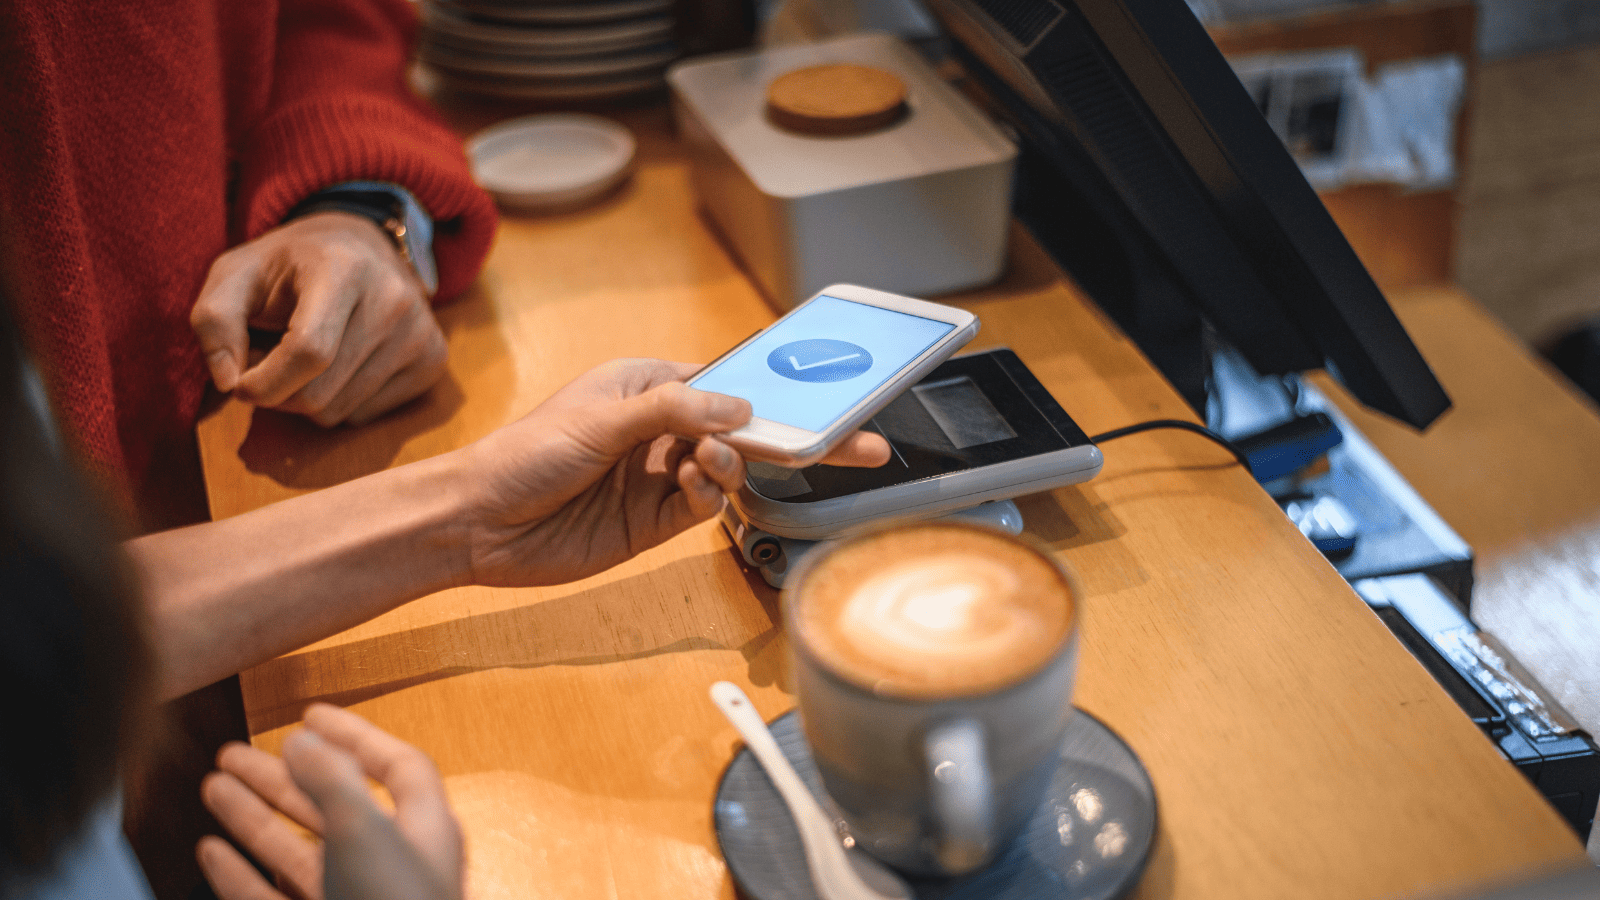 paying for coffee